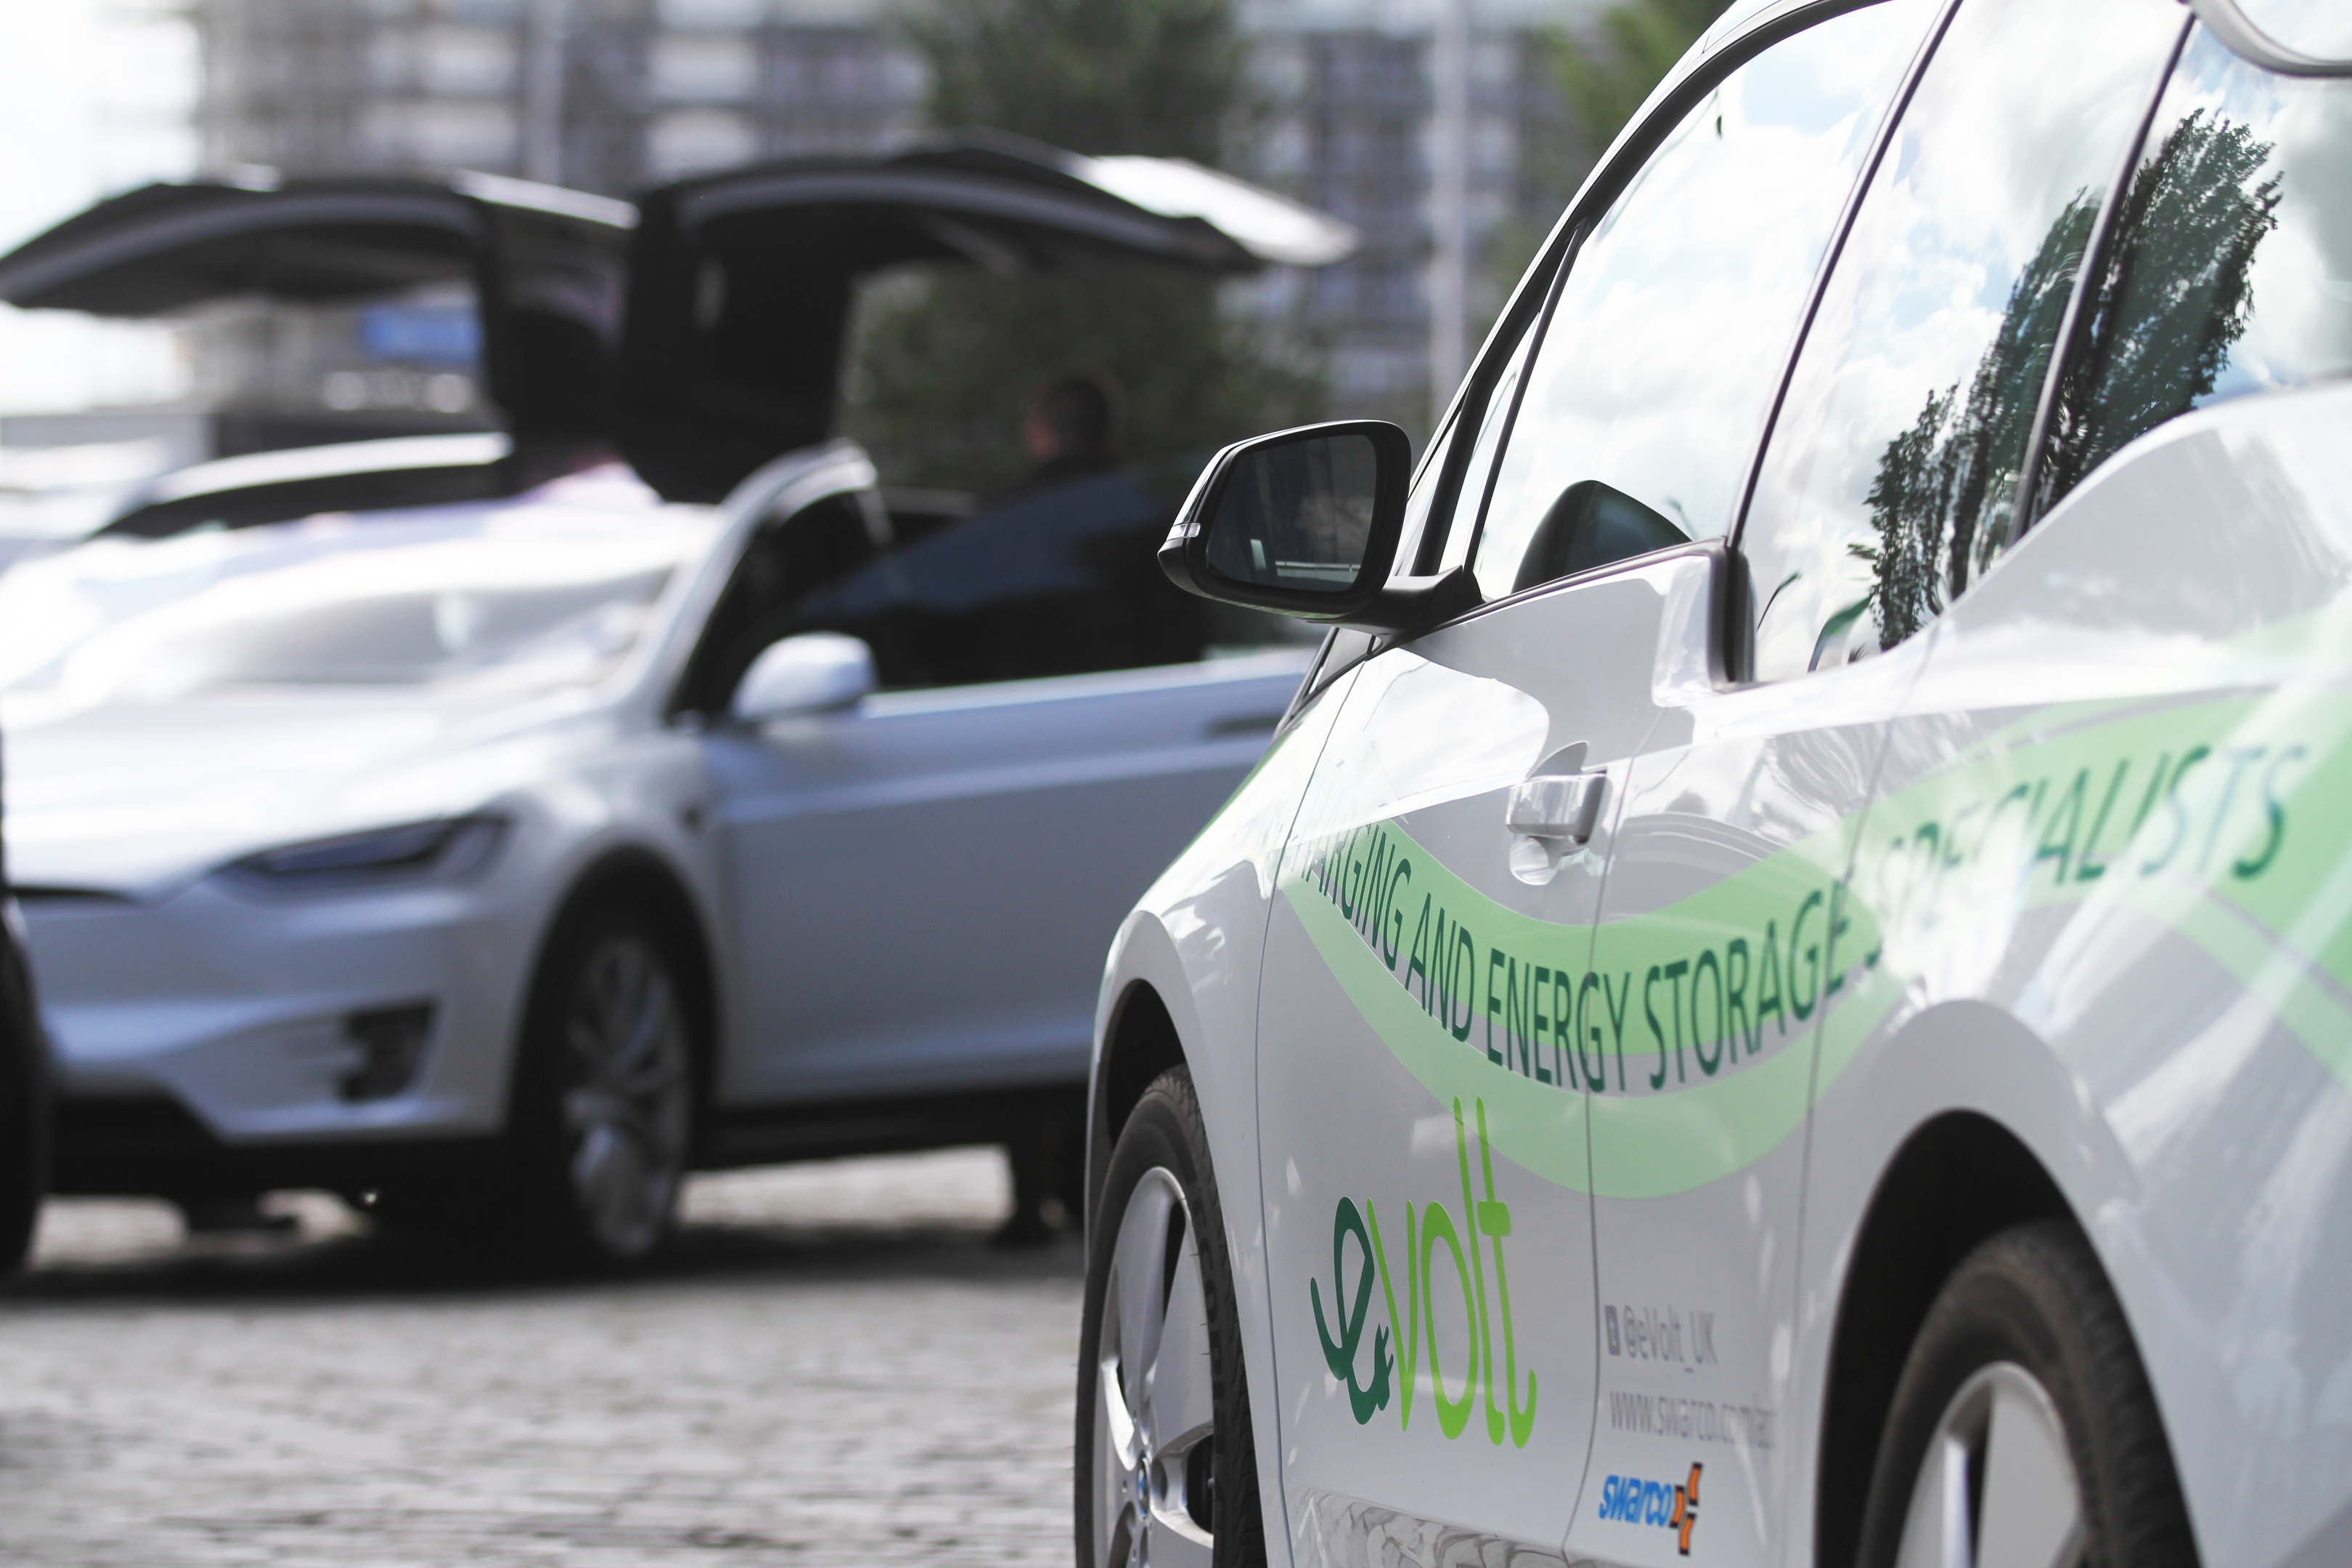 Electric cars have sparked a strong debate among Courier readers.